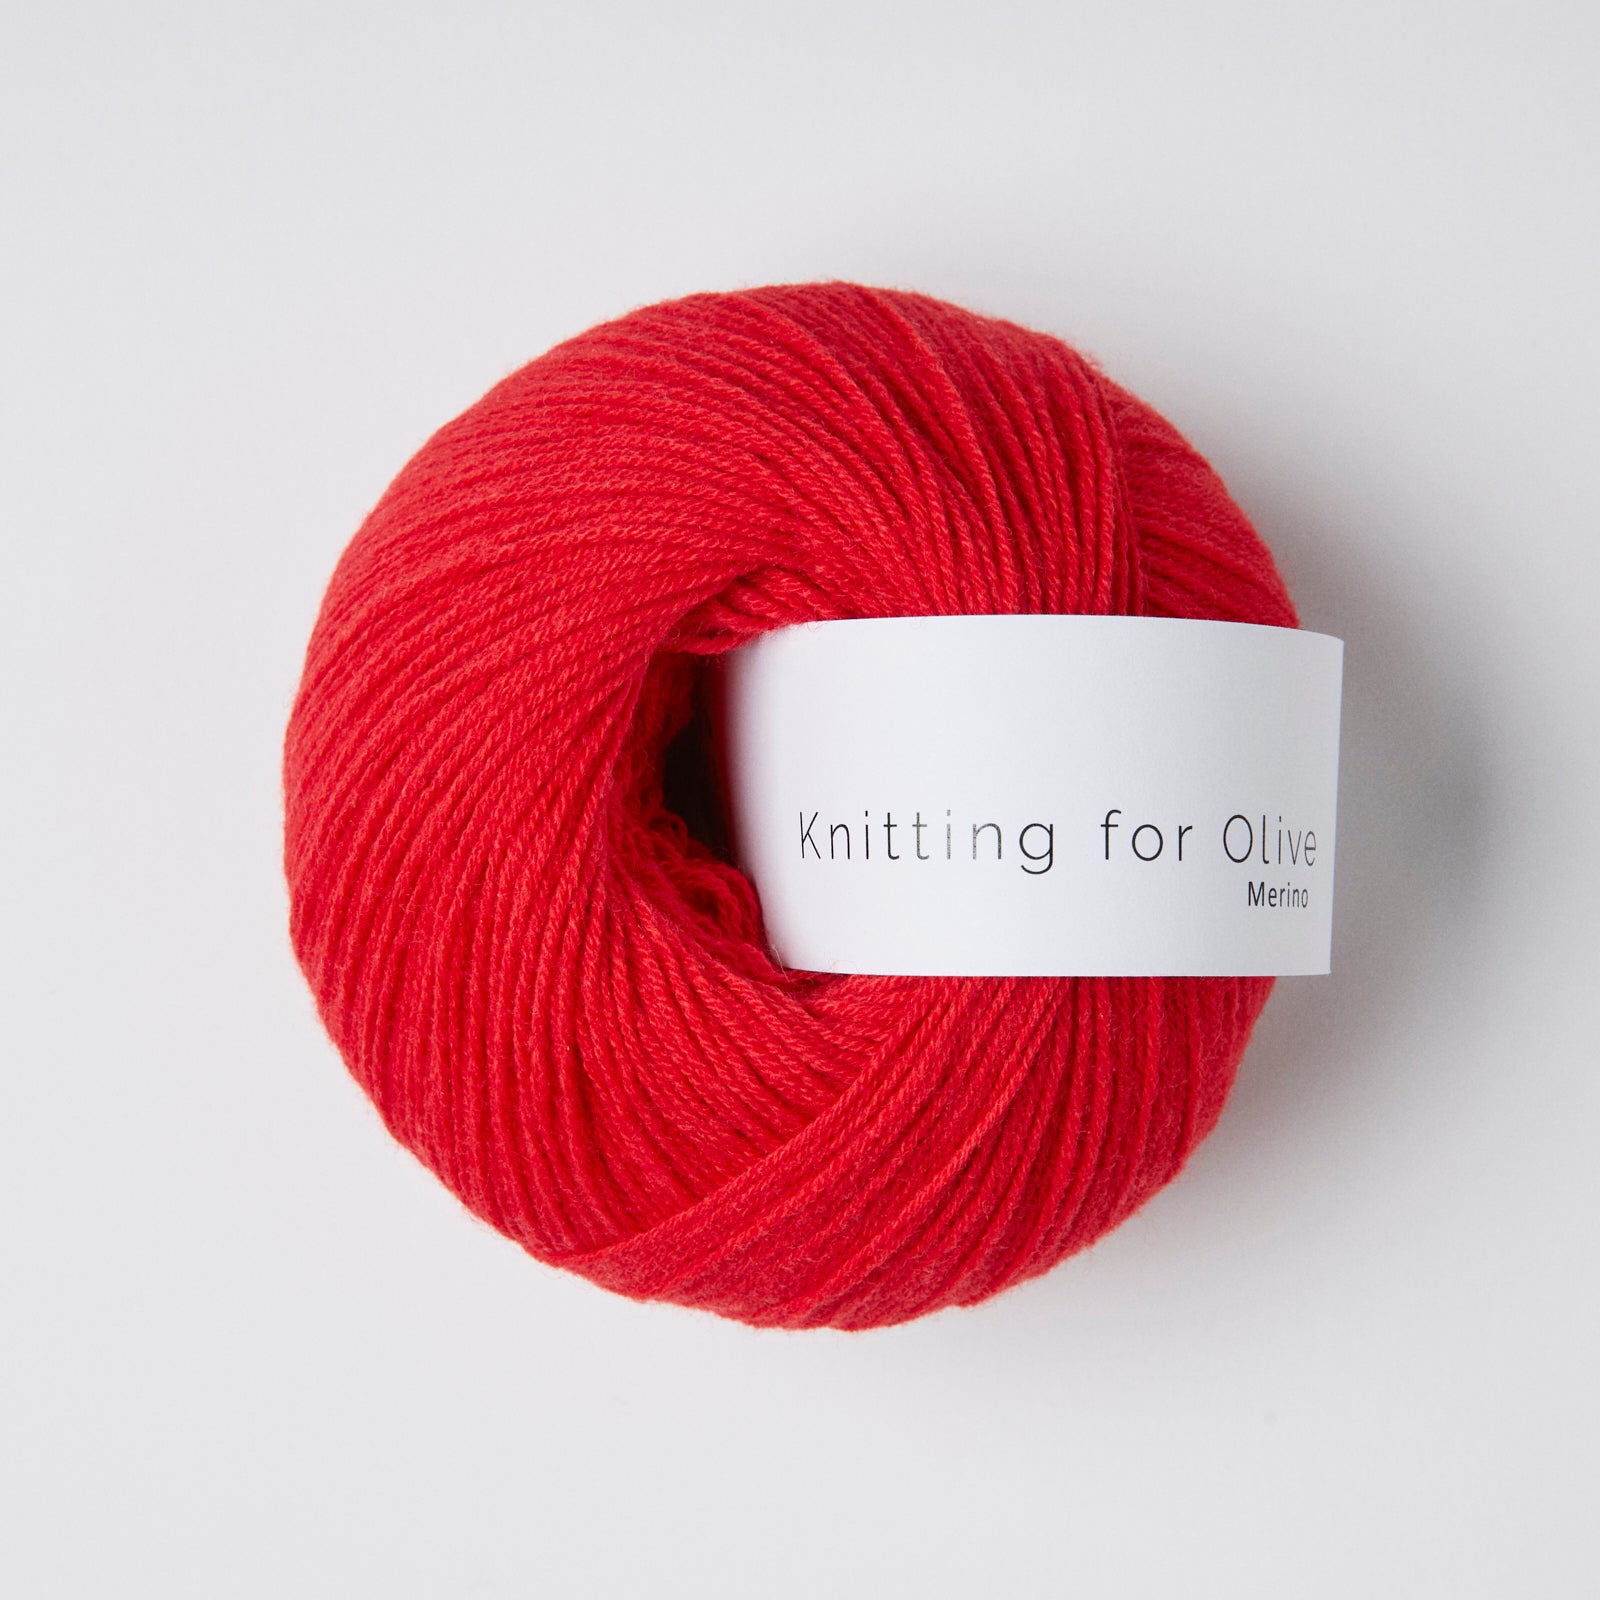 Knitting for Olive Merino - Red Currant